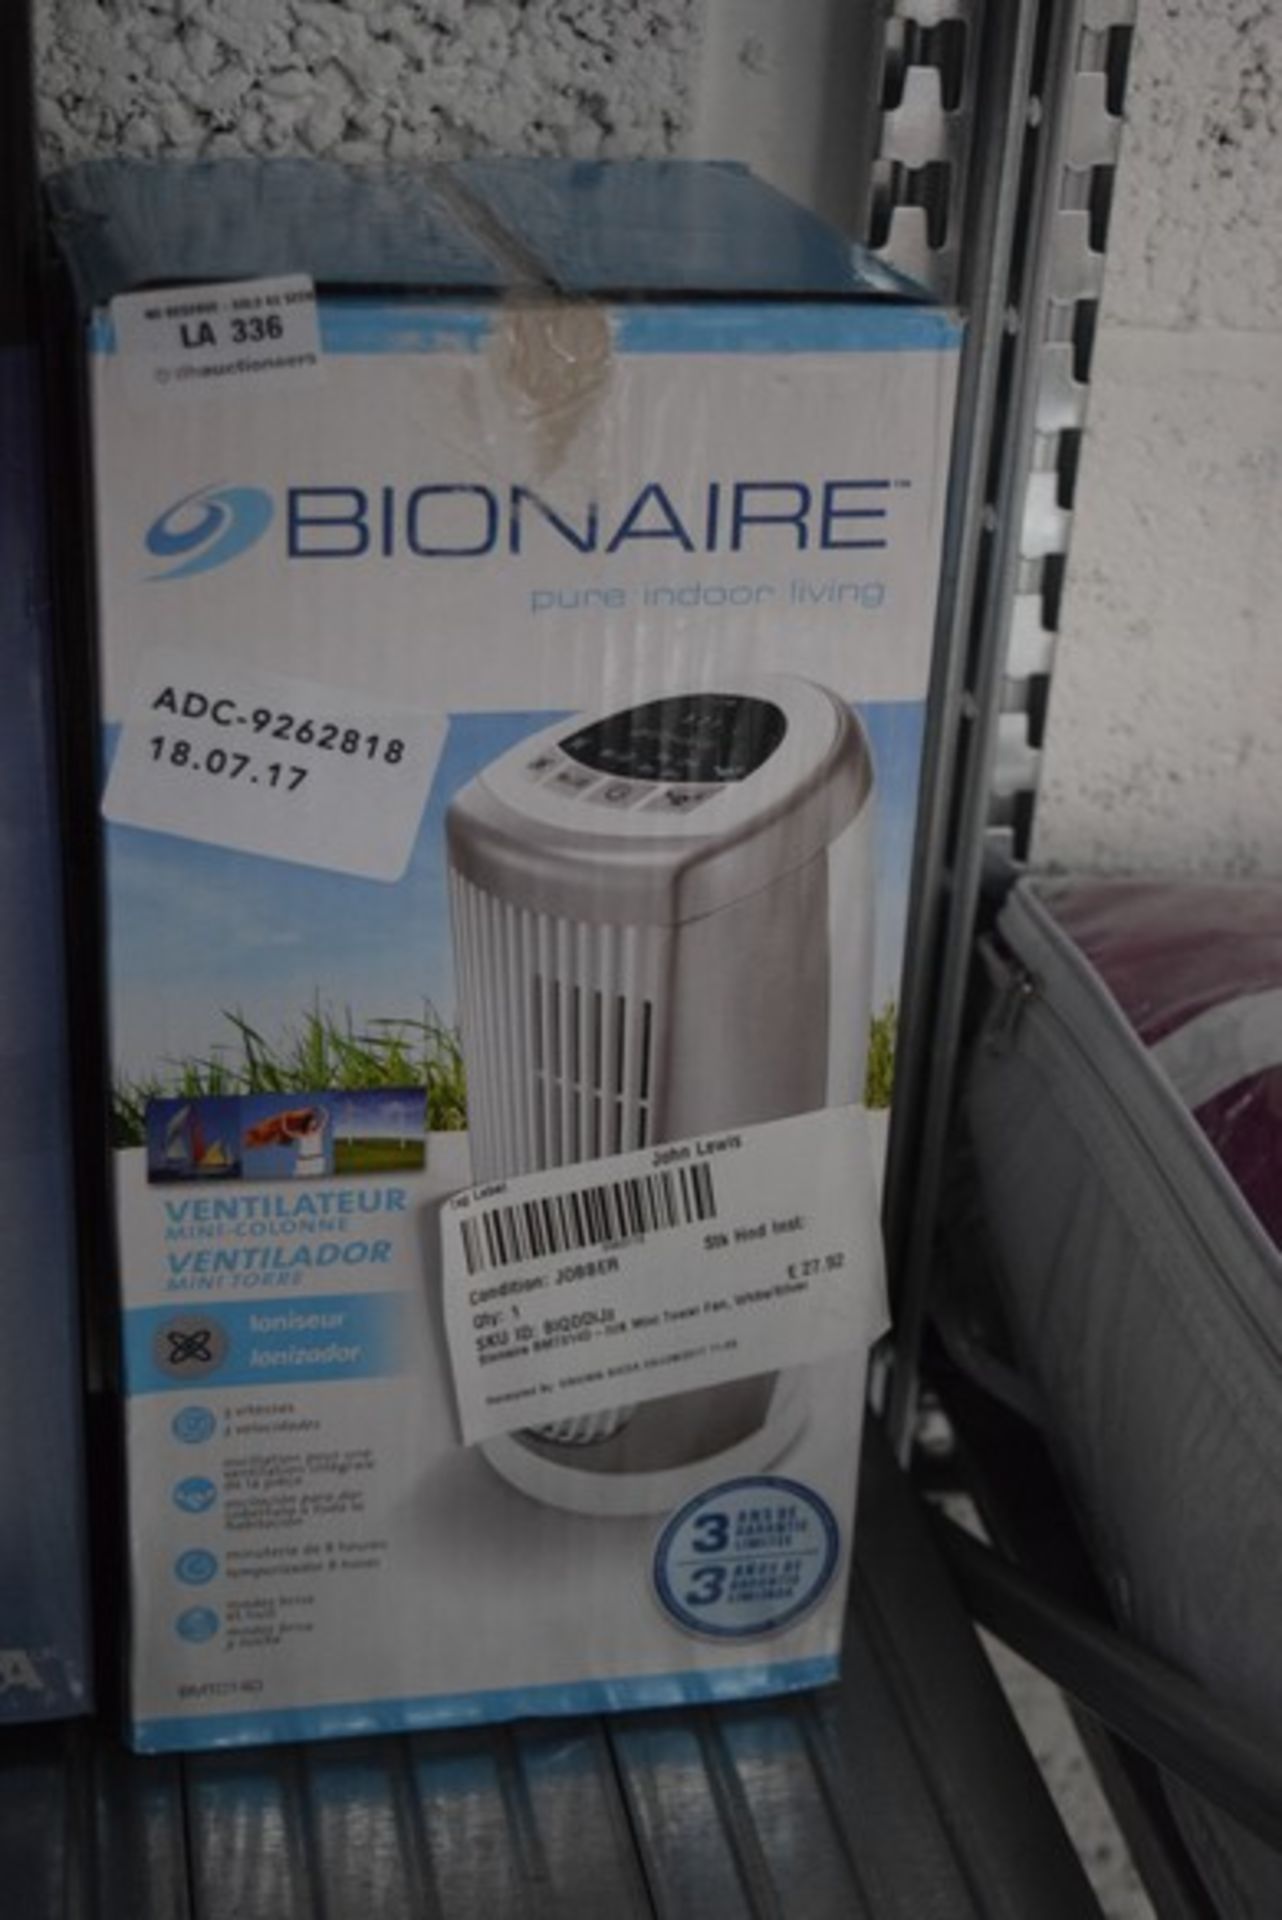 1 x BOXED BIONAIRE MINI TOWER FAN RRP £30 18.07.17 *PLEASE NOTE THAT THE BID PRICE IS MULTIPLIED